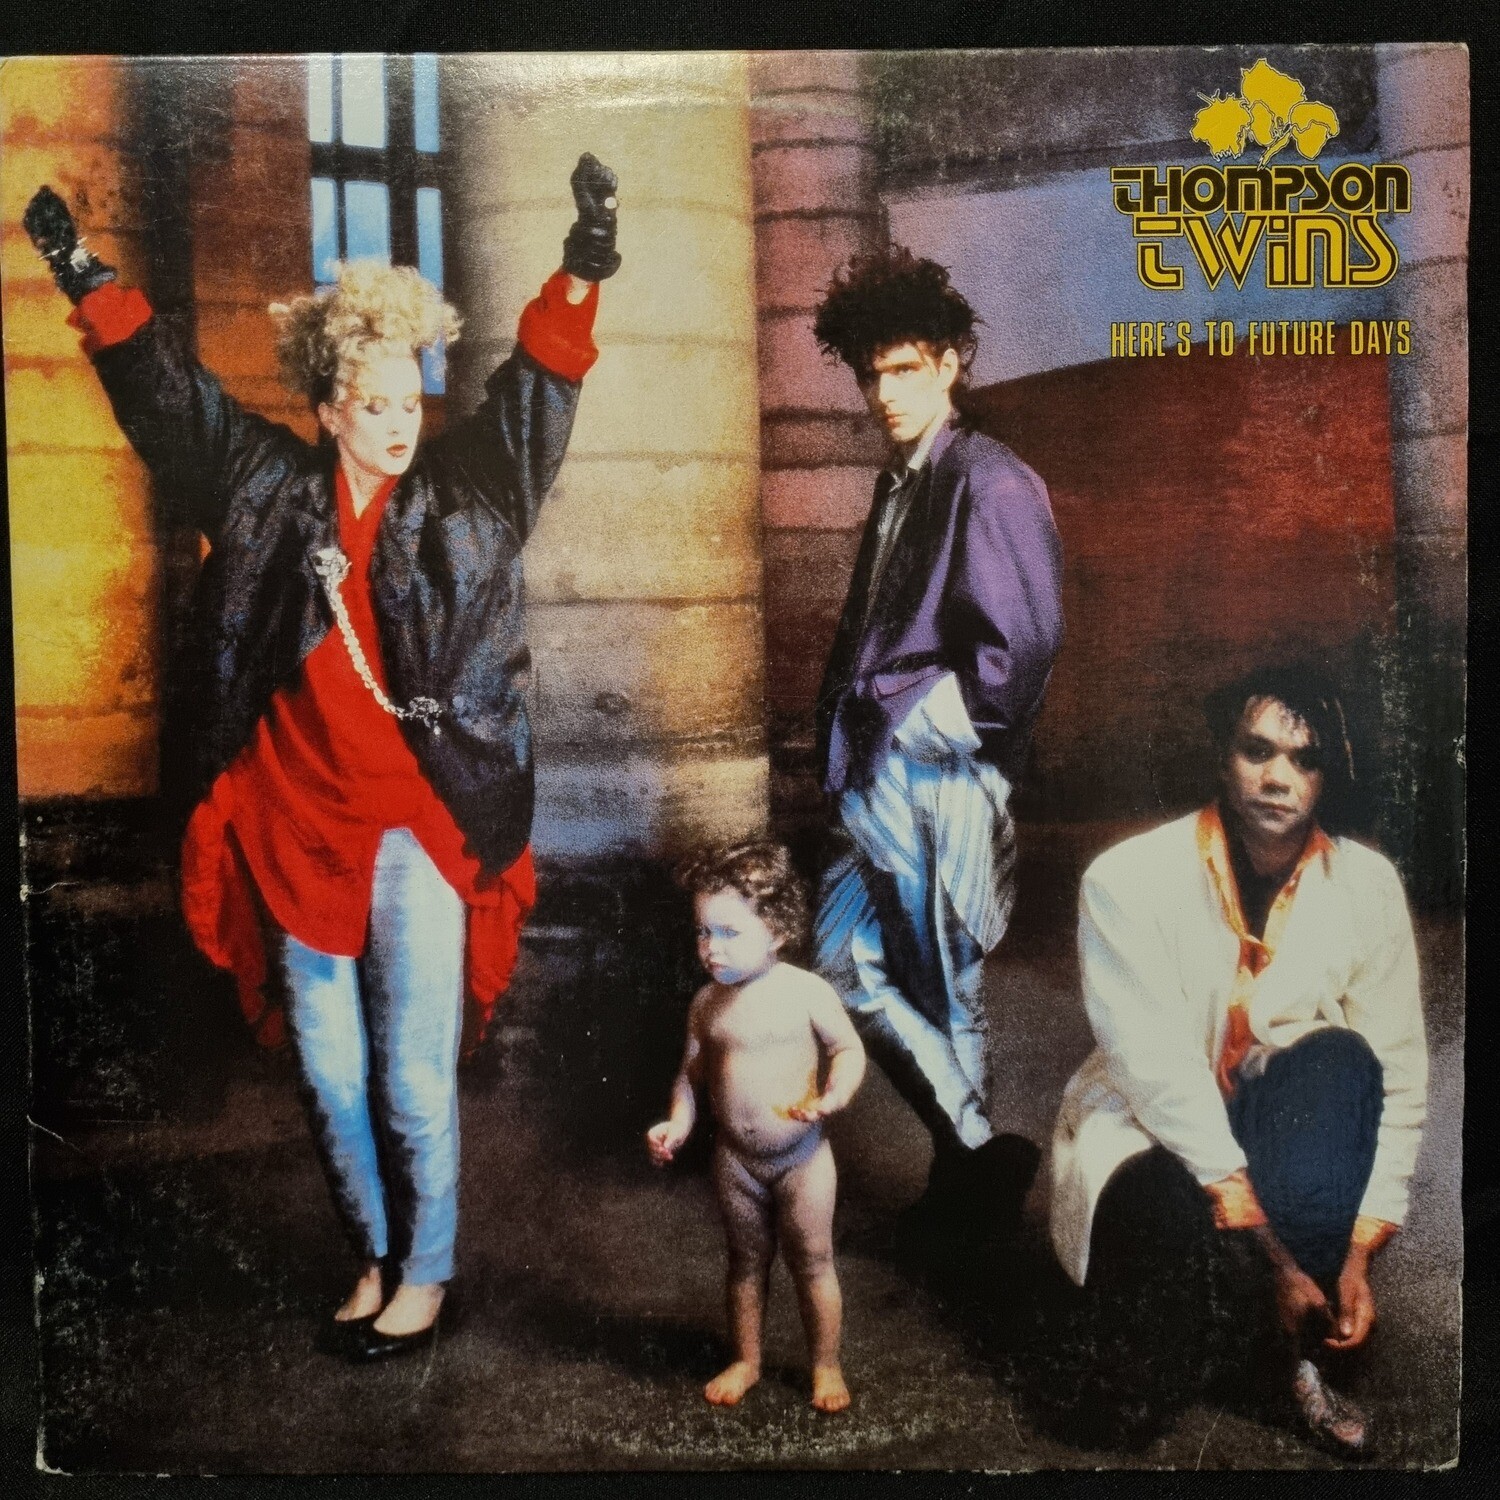 Thompson Twins- Here's to Future Days